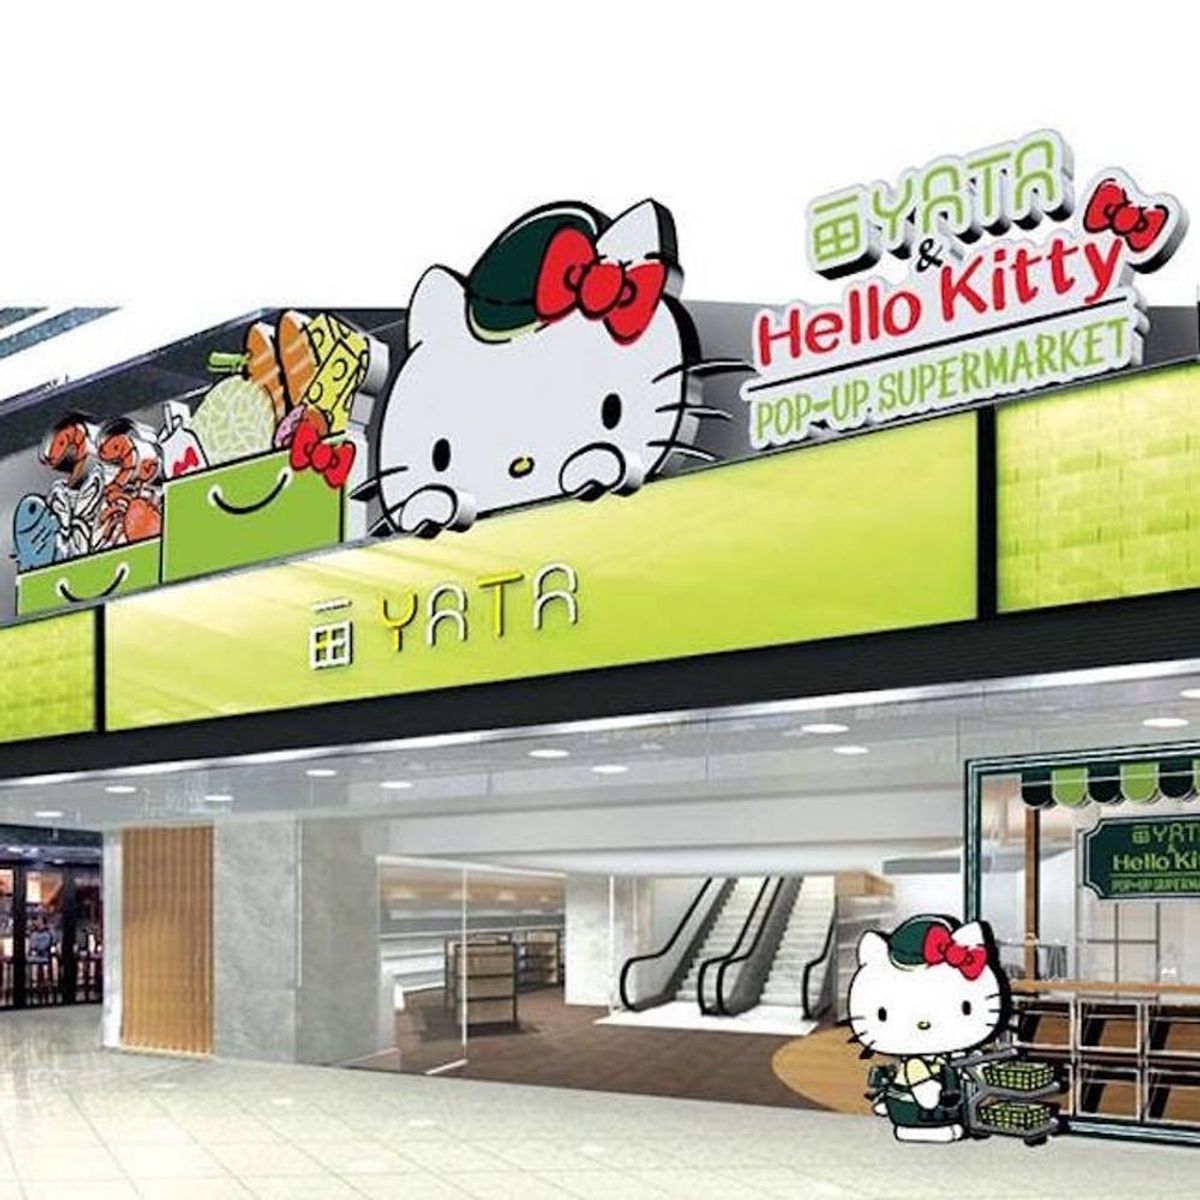 This Hello Kitty Grocery Store Is Almost Too Whimsical to Believe